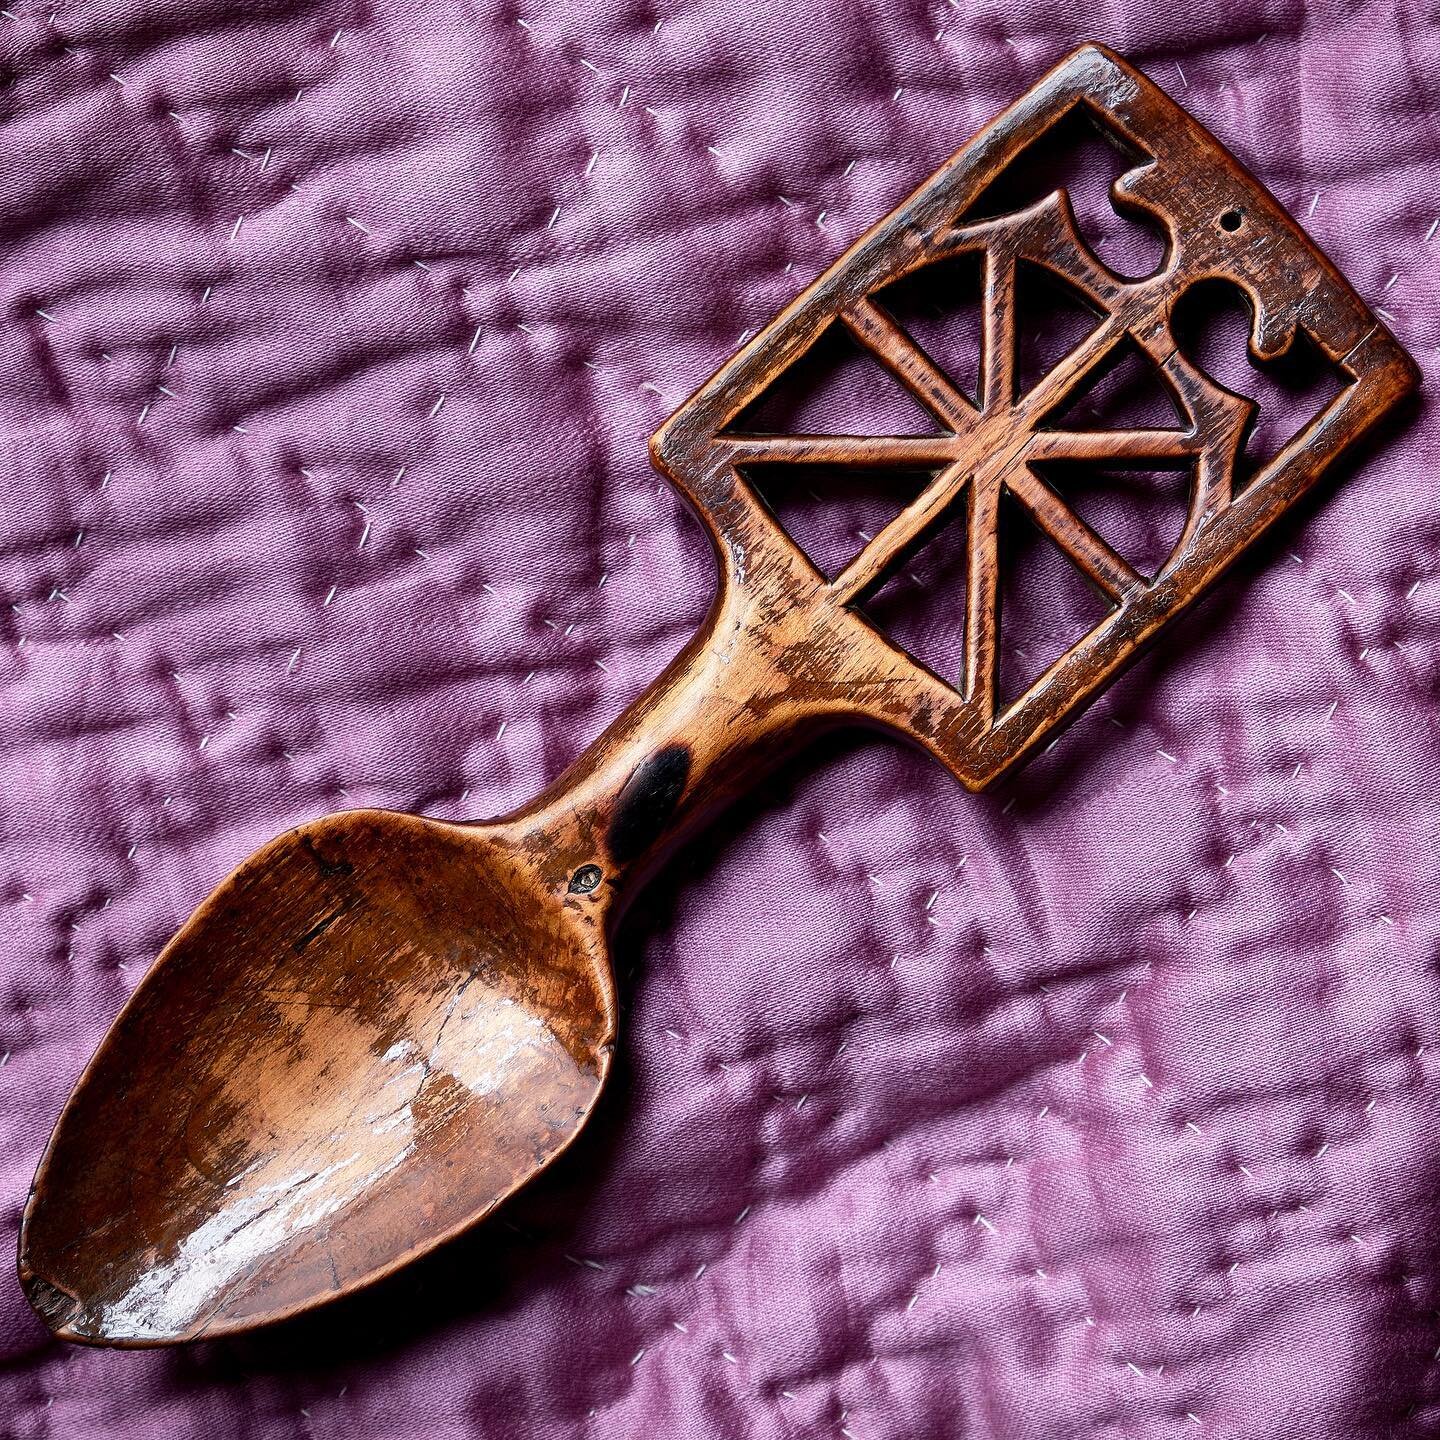 Happy Valentines Day!

&hellip;or, as we like to think of it, Welsh Lovespoon Day!

So here we have a lovely Welsh sycamore love spoon of unusual, small size, the rectangular handle pierced with trefoil and radial designs above a short stem and elega